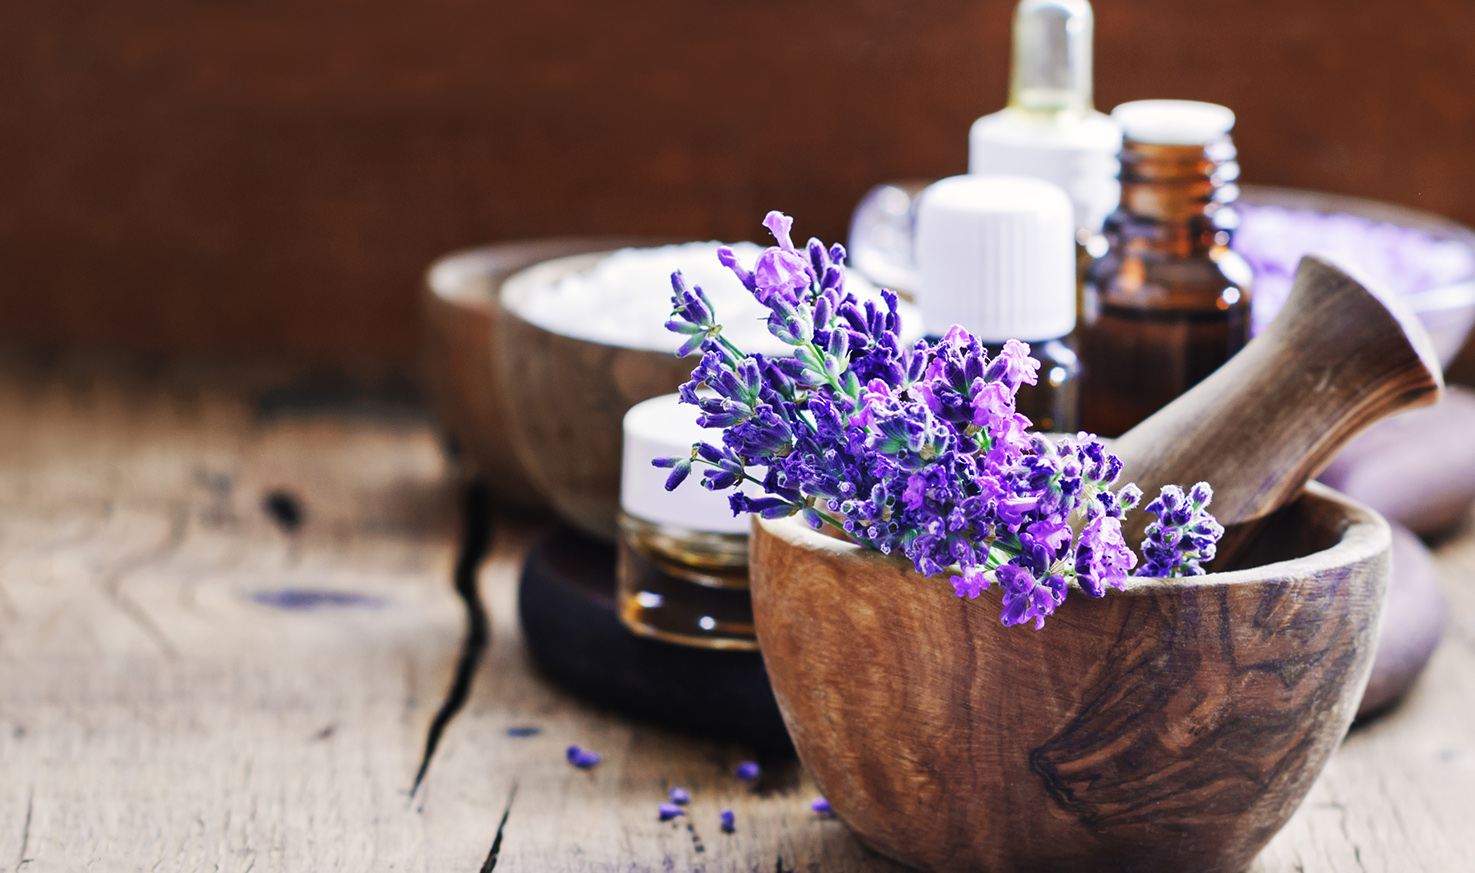 Lavender spa , bunch of lavender flowers , essential oil and salt on a rustic wooden background.